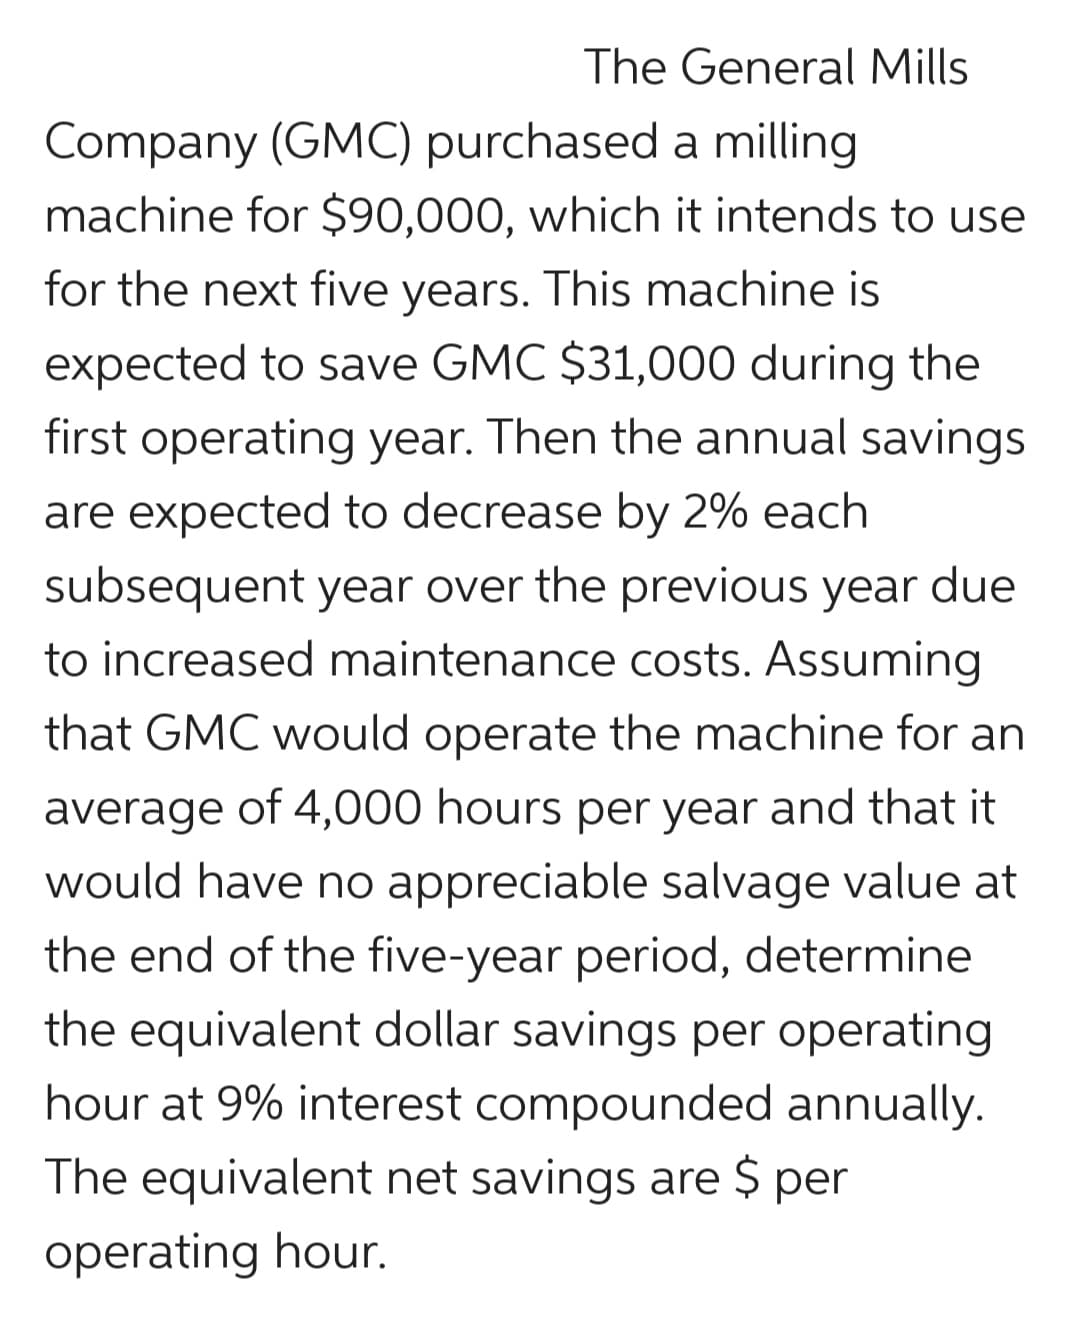 The General Mills
Company (GMC) purchased a milling
machine for $90,000, which it intends to use
for the next five years. This machine is
expected to save GMC $31,000 during the
first operating year. Then the annual savings
are expected to decrease by 2% each
subsequent year over the previous year due
to increased maintenance costs. Assuming
that GMC would operate the machine for an
average of 4,000 hours per year and that it
would have no appreciable salvage value at
the end of the five-year period, determine
the equivalent dollar savings per operating
hour at 9% interest compounded annually.
The equivalent net savings are $ per
operating hour.
